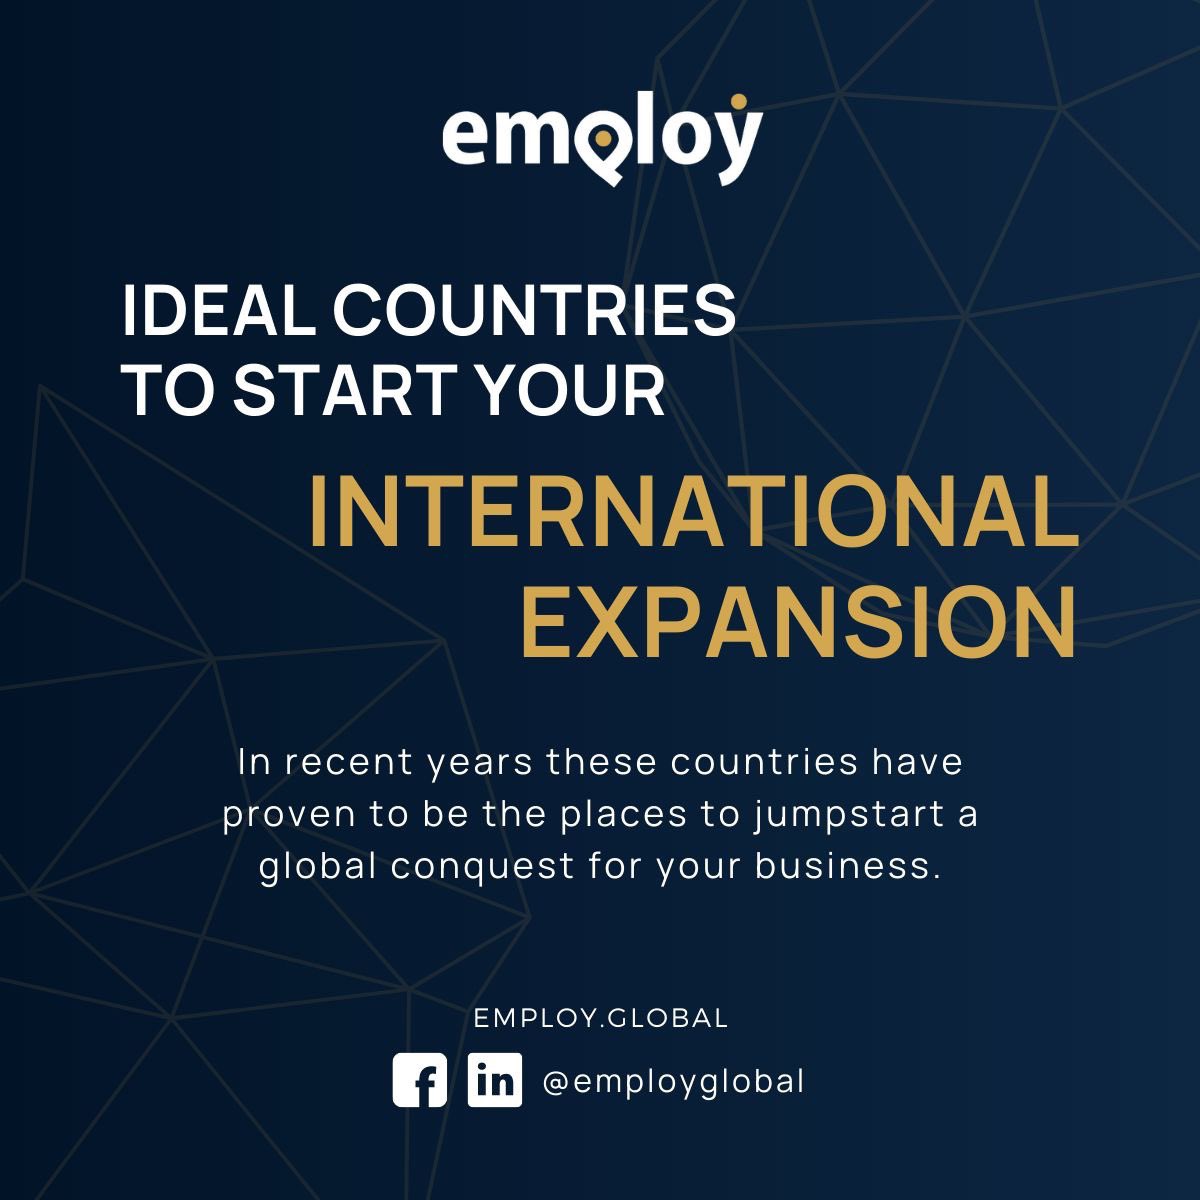 Are you ready to grow your business globally? 🚀 here’s an end-to-end solution to that simplifies global expansion 👉 lnkd.in/djBuKBP8 #employ #eor #peo #visaexperts #payrollservices #hrconsulting #asia #europe #africa